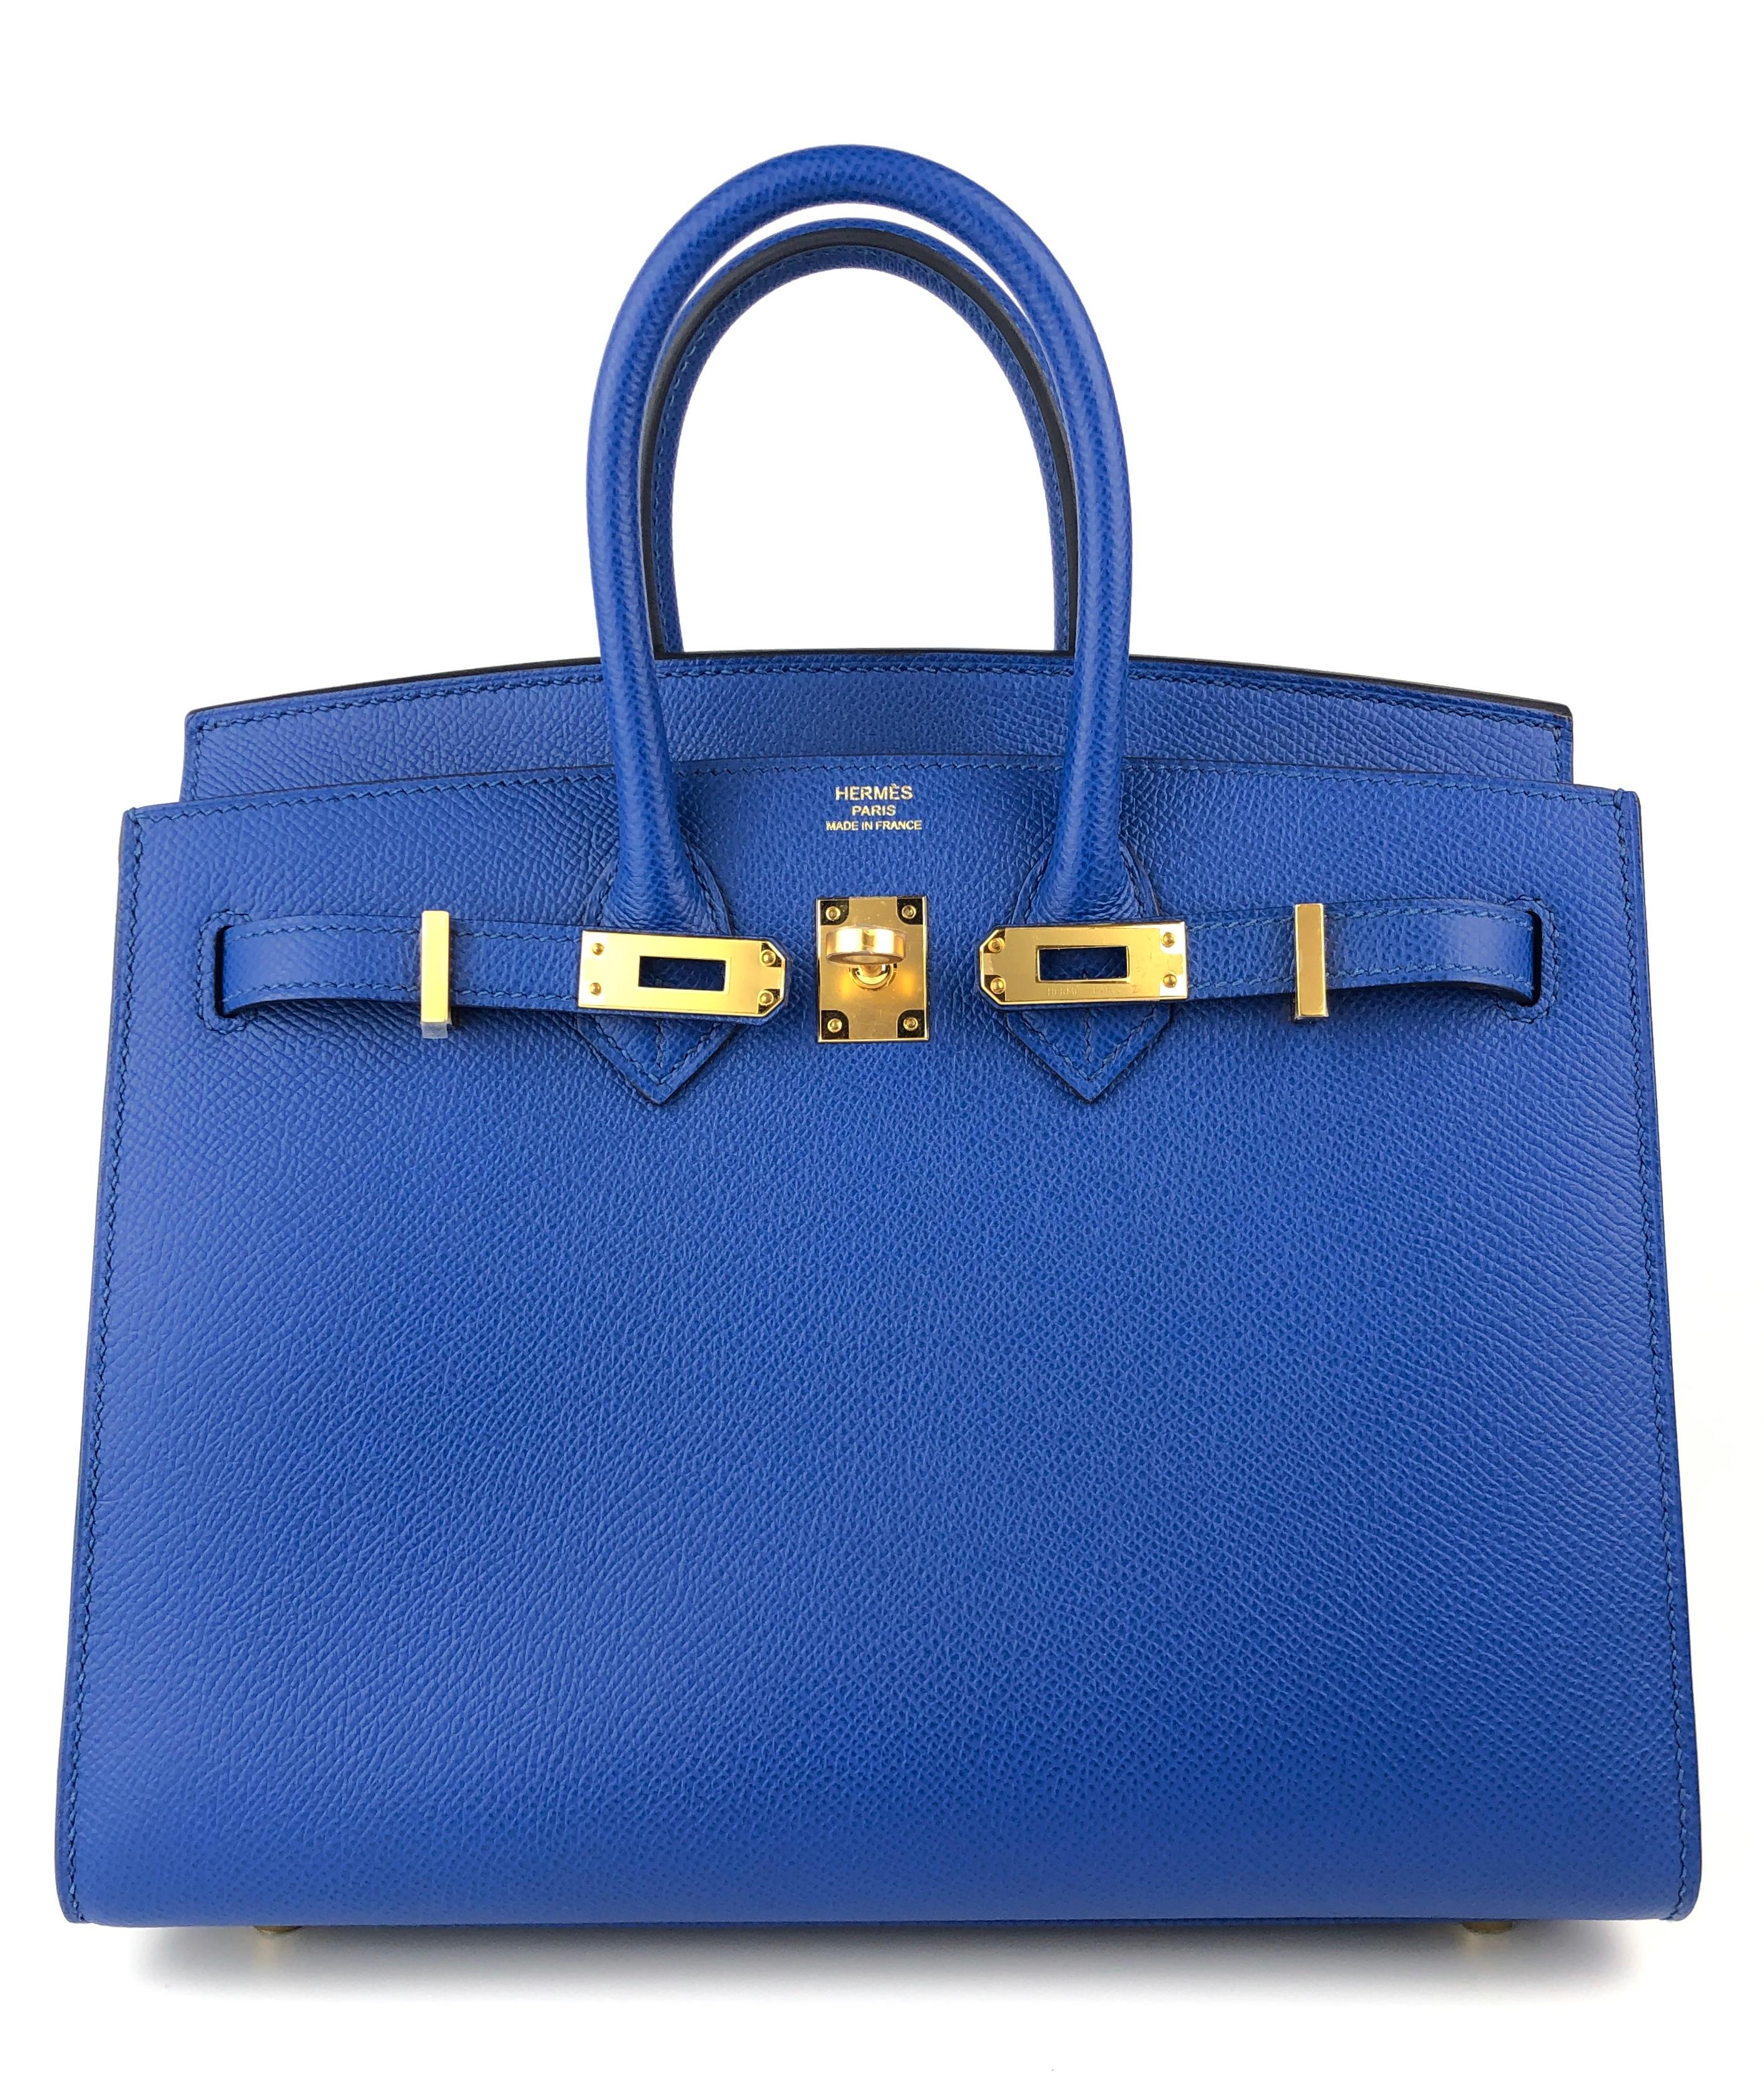 Absolutely Stunning As New Hermes Birkin 25 Sellier Blue France Epsom Leather complimented by Gold Hardware. As New Plastic on all Hardware. Z Stamp 2021. 

Please Note The Clochette, Lock and Keys are not included.

Shop with Confidence from Lux